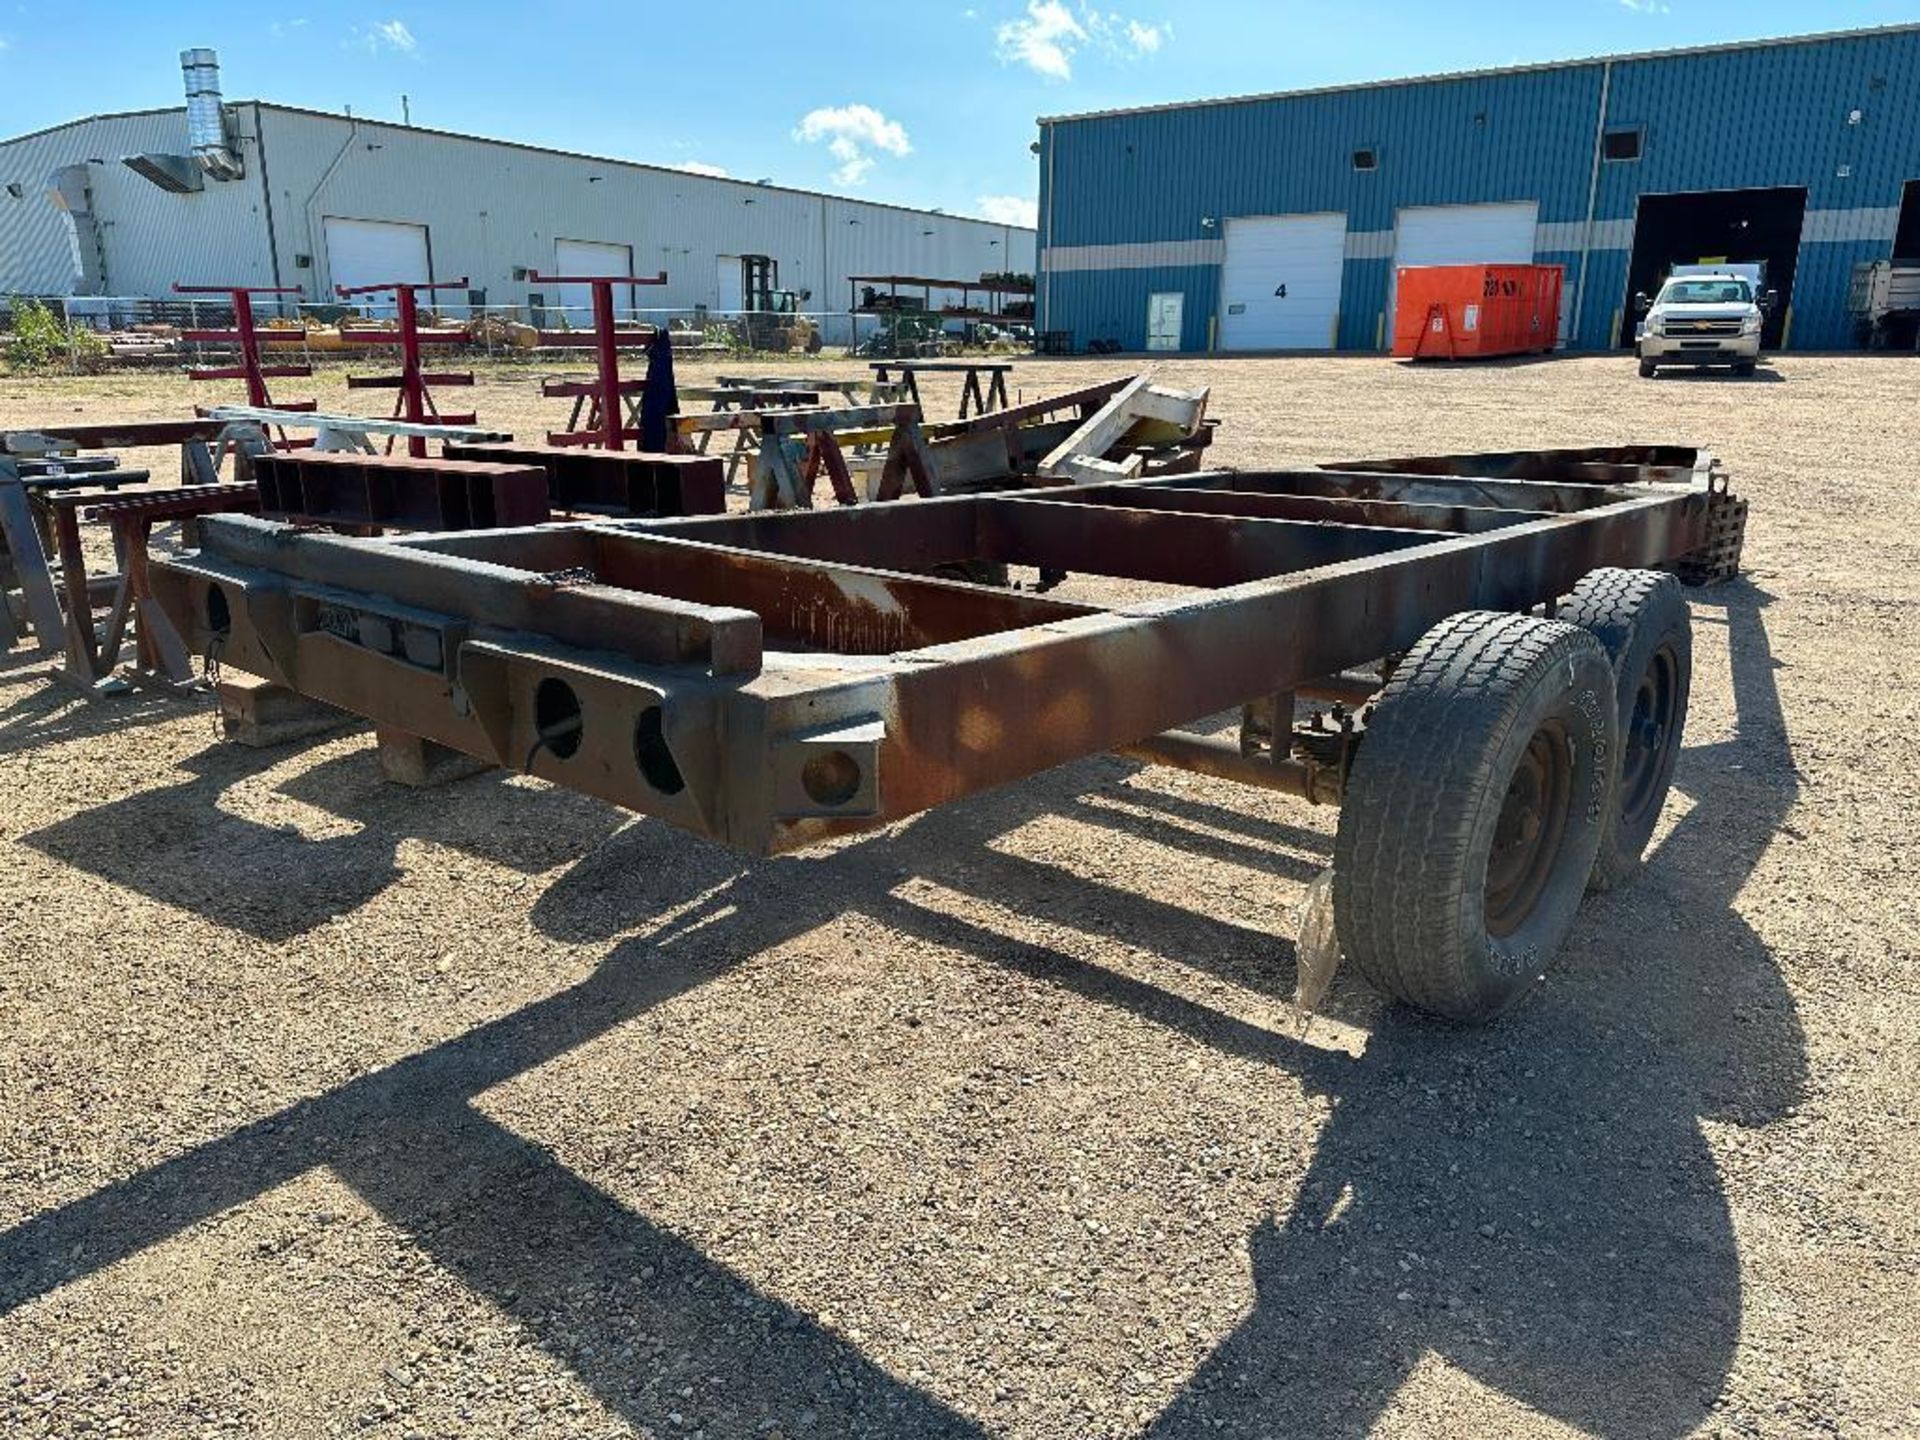 T/A Trailer Frame w/ Pintle Hitch, 14’ x 70” Deck Area, etc. - Image 4 of 9